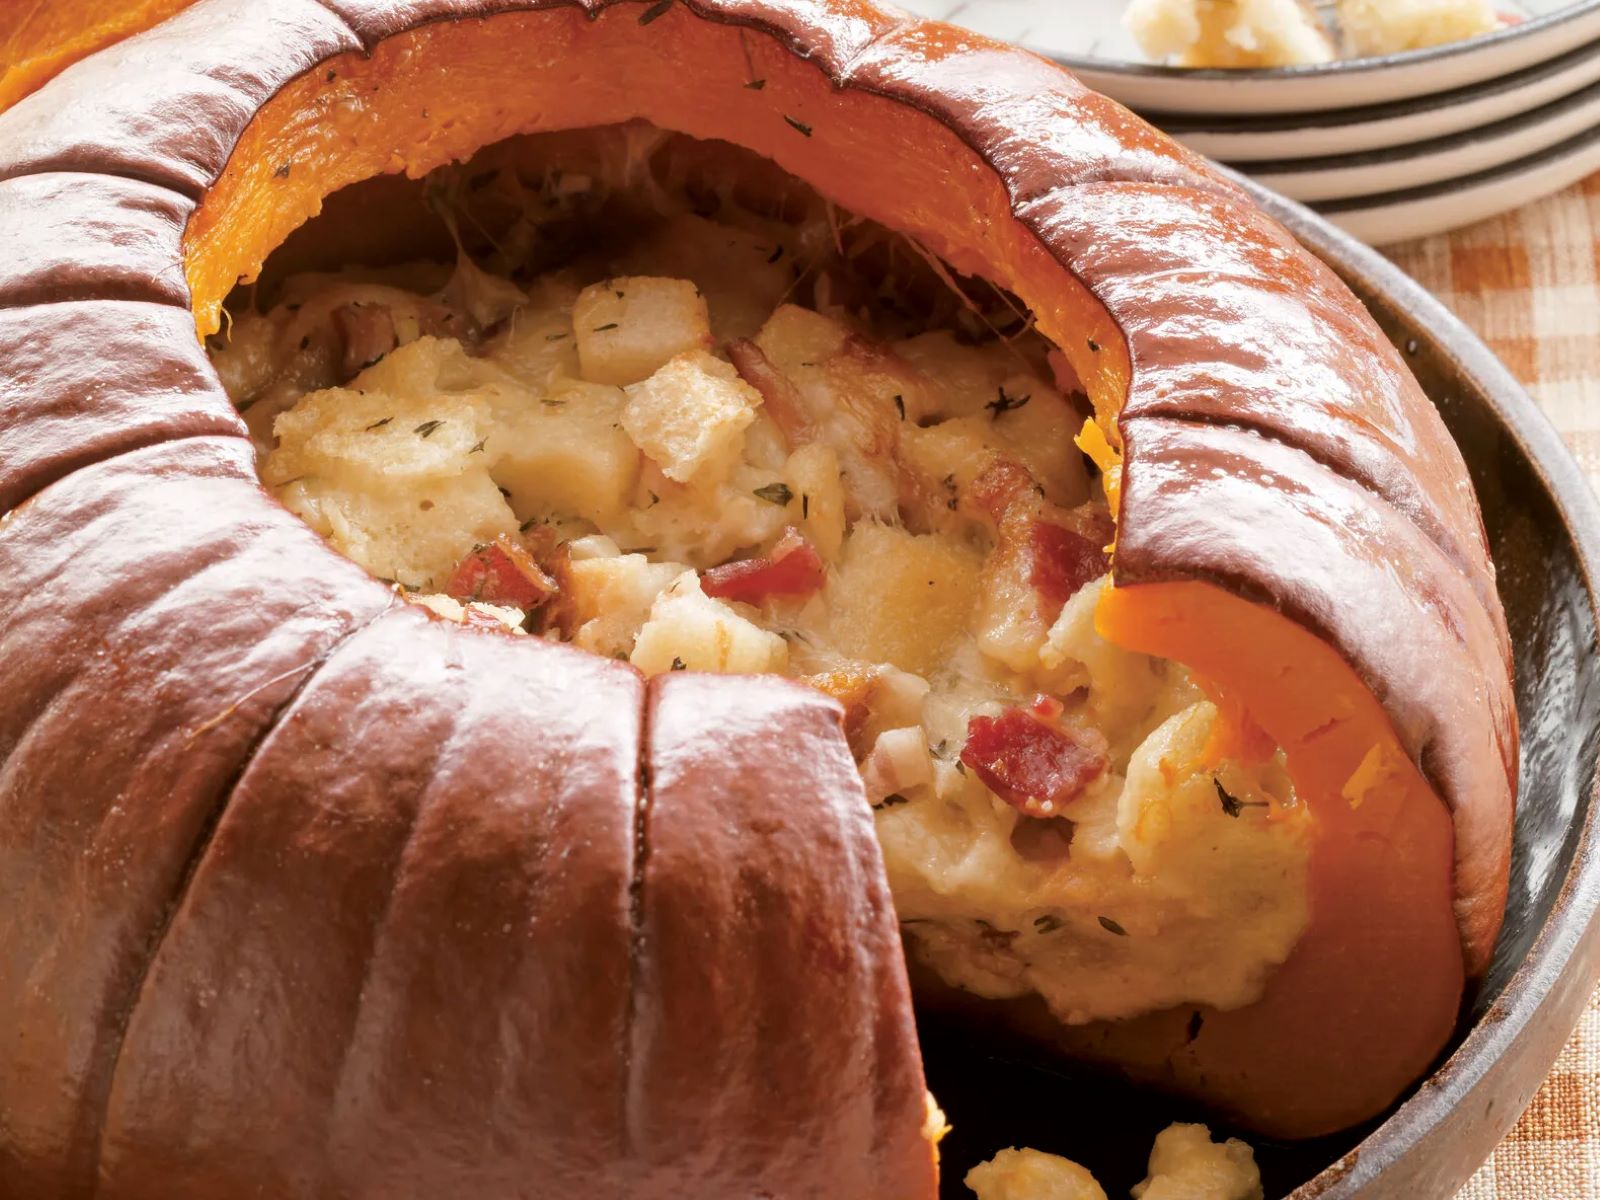 Delicious And Nutritious Pumpkin Stuffed With A Variety Of Ingredients